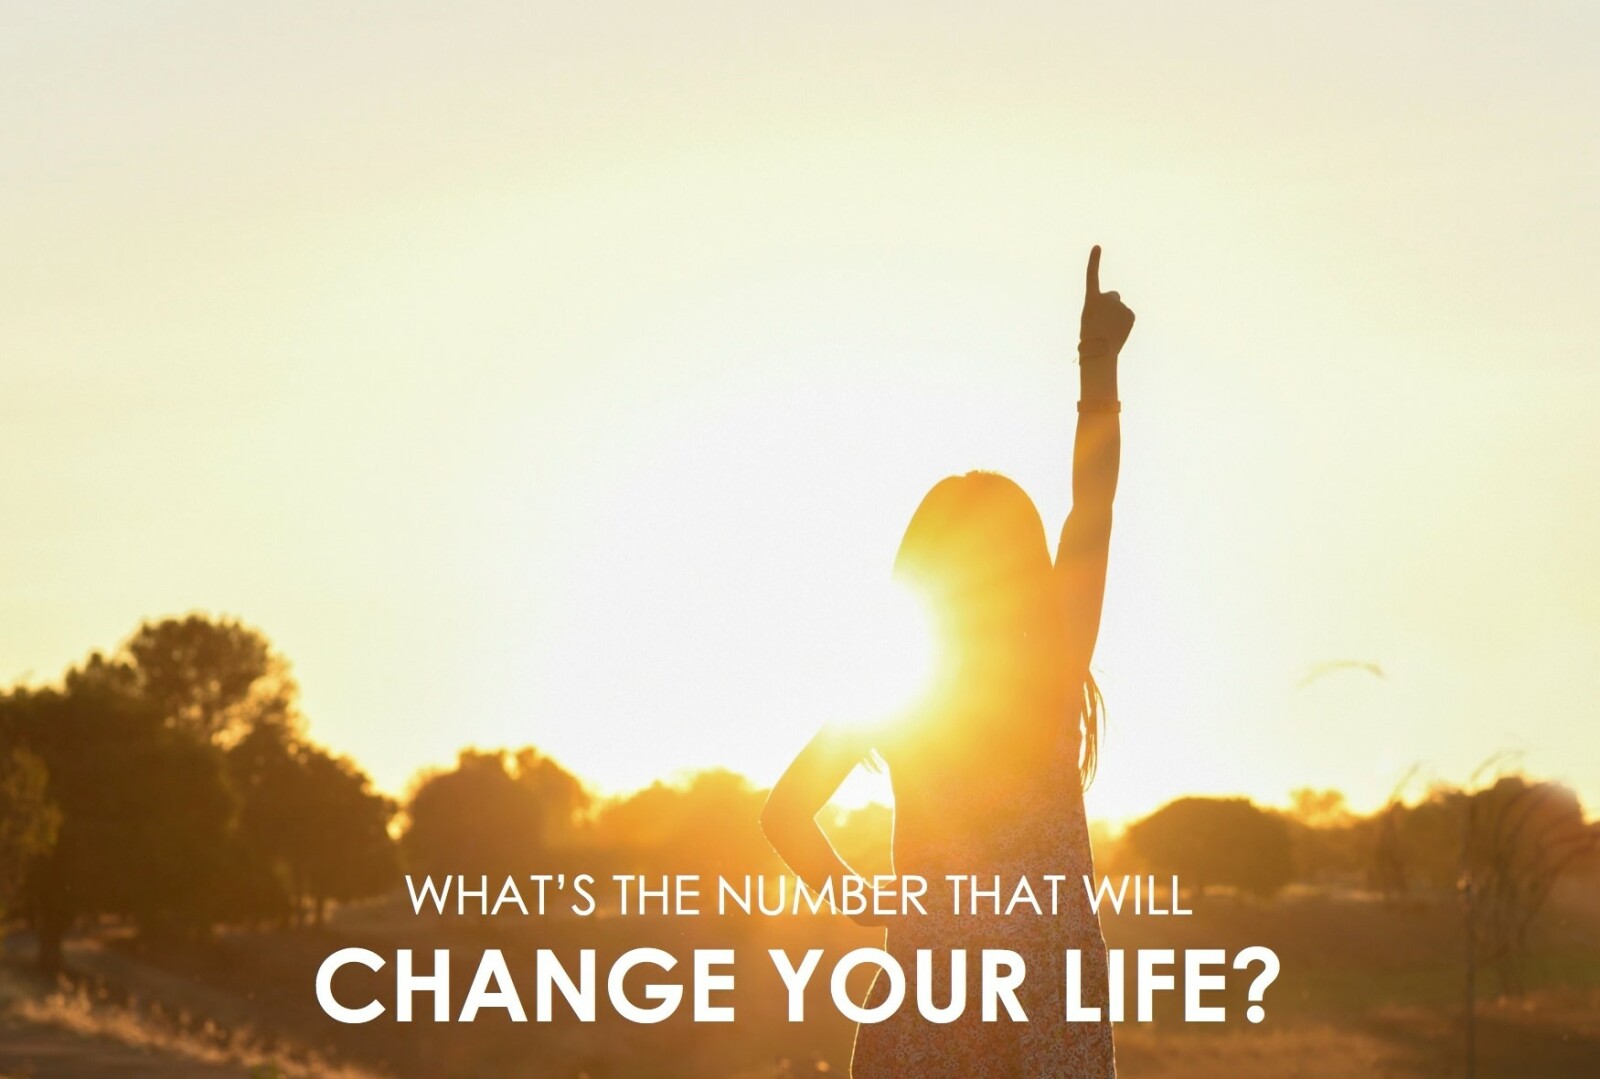 What’s the ONE number that will change your life?